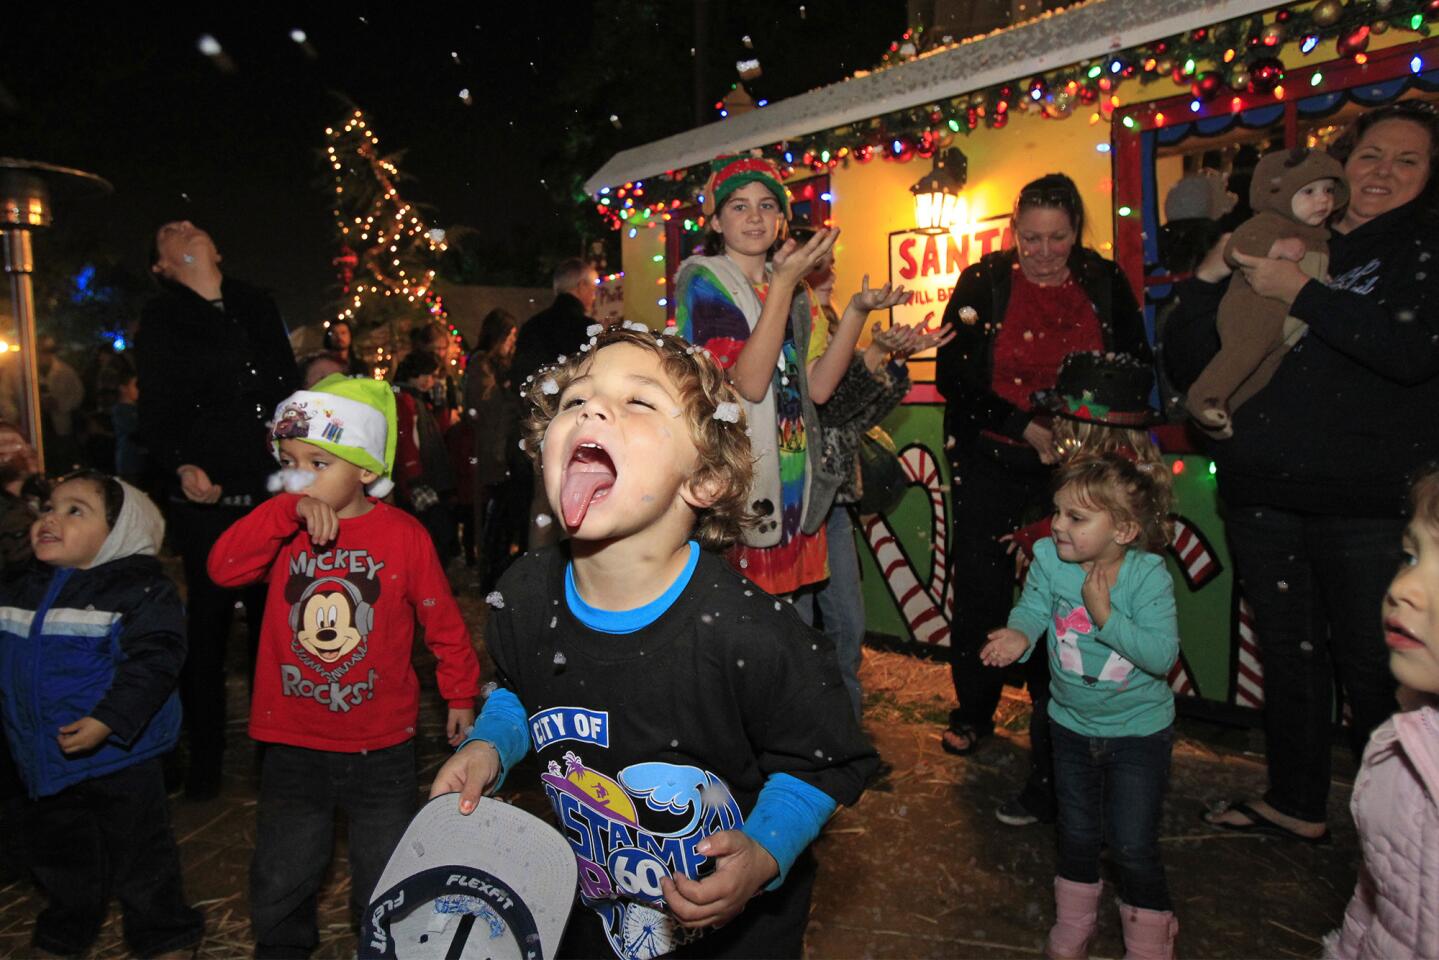 Nicky Johnson, 6, of Costa Mesa sticks his tongue out to catch snow during the opening for the Snoopy House at Costa Mesa City Hall on Friday.